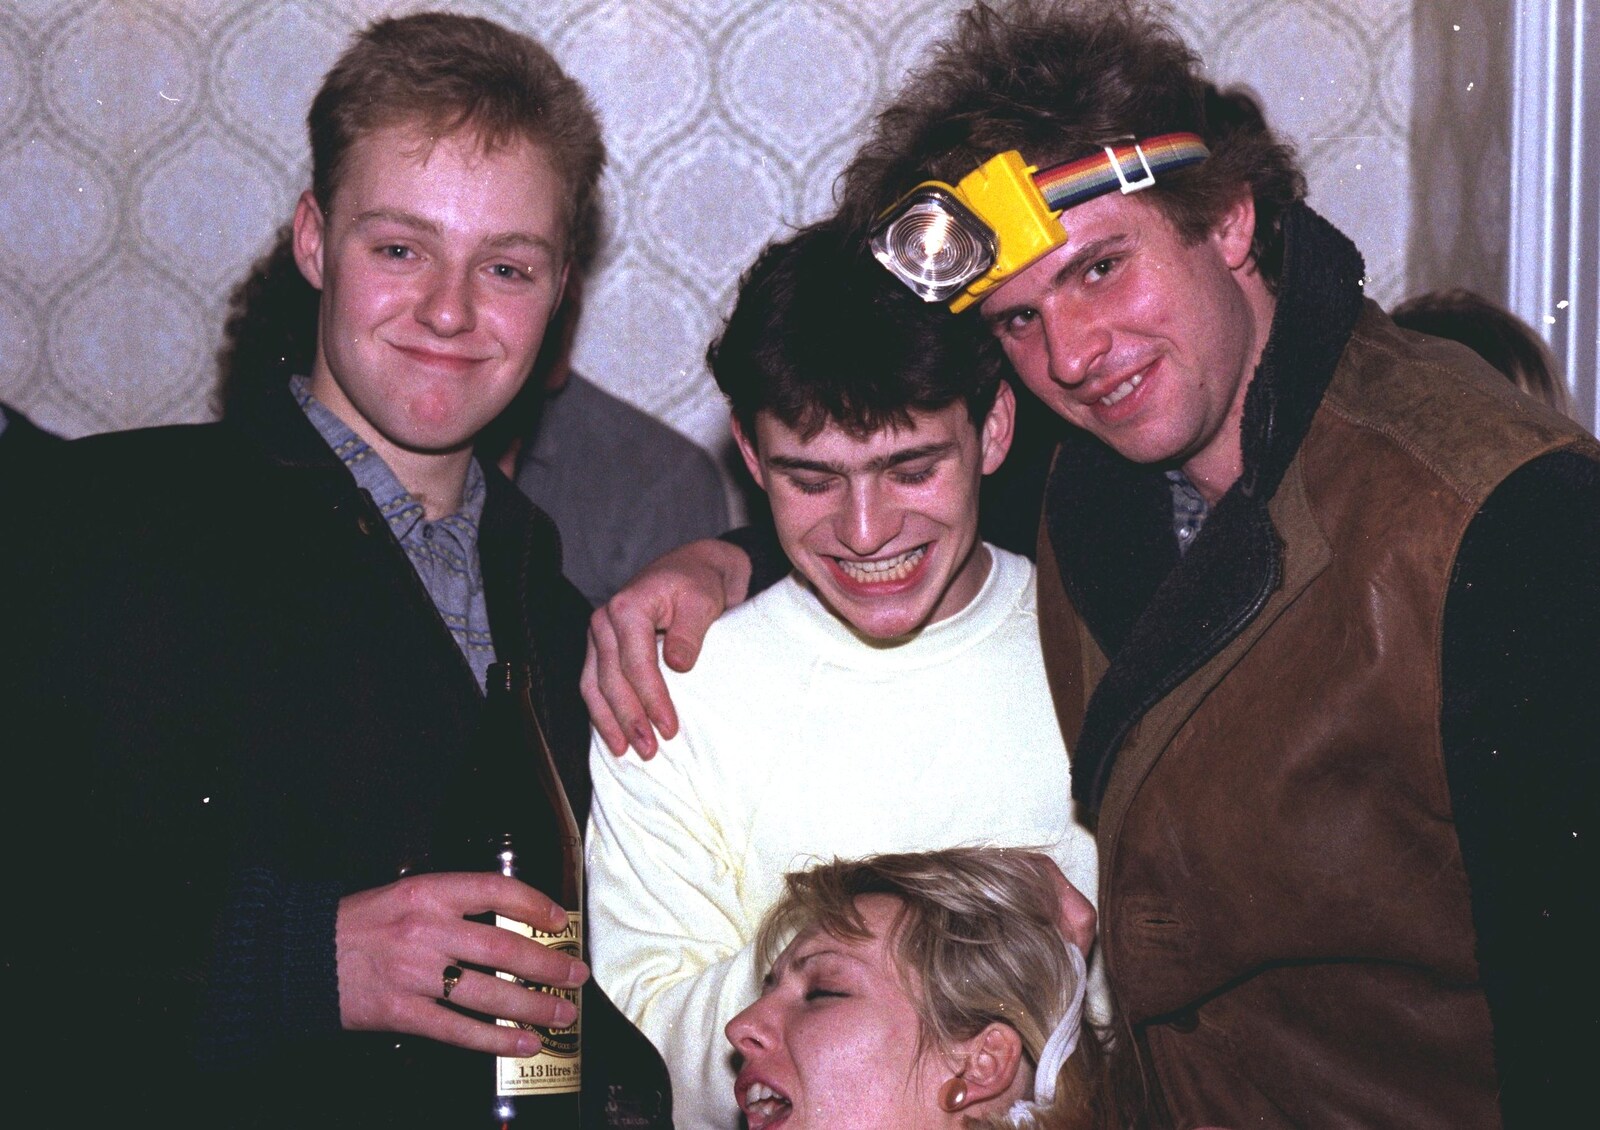 Head torch from Uni: Simon Read's Party, North Road East, Plymouth - 10th October 1986